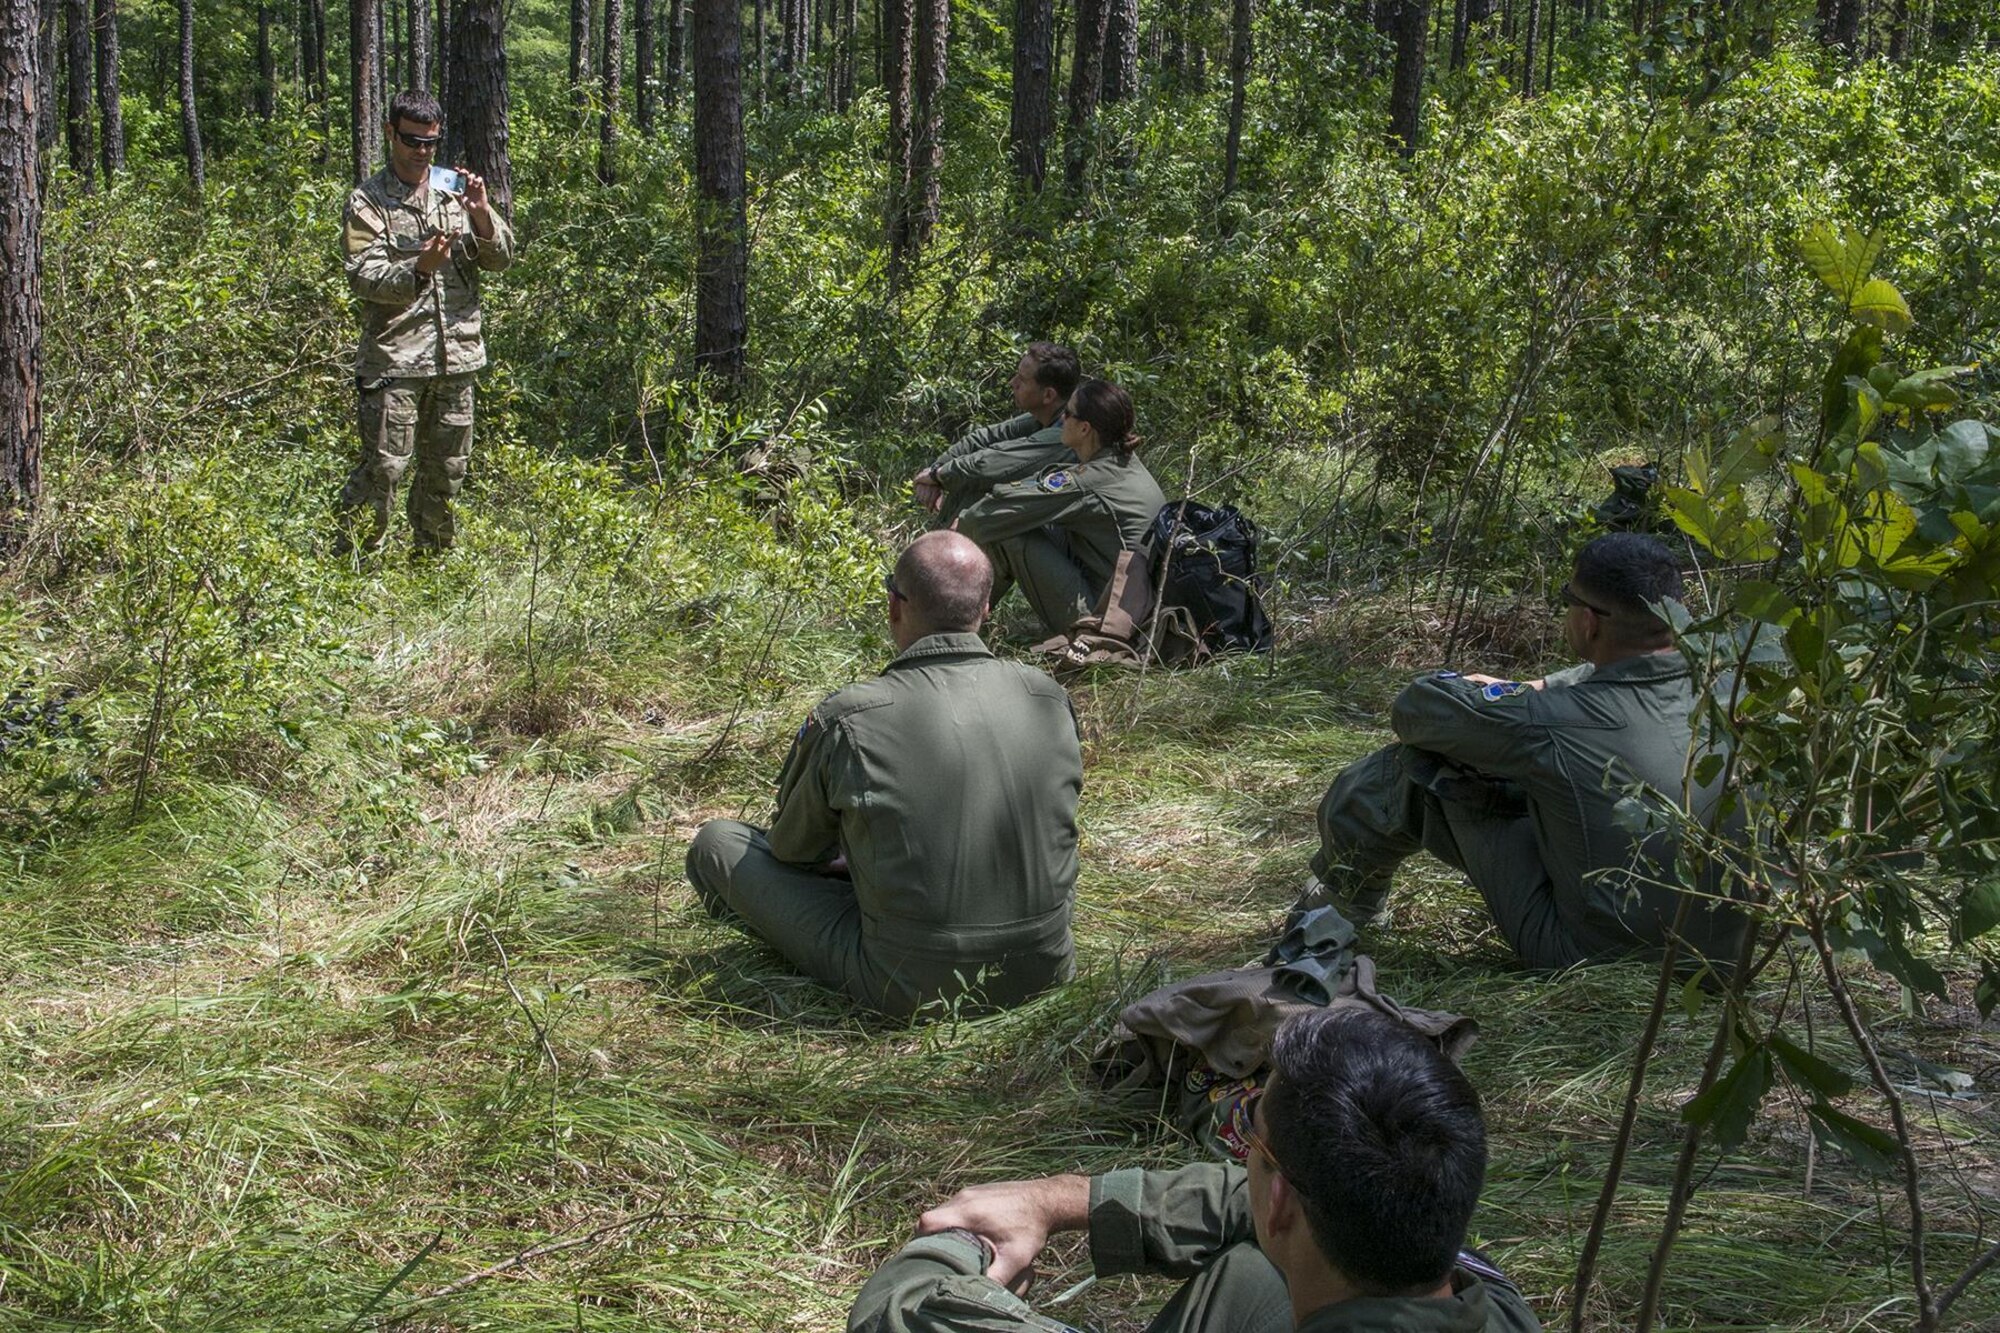 U.S. Air Force Staff Sgt. Matthew Mete, 2nd Operations Support Squadron SERE instructor, instructs a group of 93rd Bomb Squadron aircrew members on how to use a signaling mirror on May 14, 2016, Claiborne Gunnery and Bombing Range, La. SERE, which stands for Survival, Evasion, Resistance and Escape, is required training for all aircrew members and provides the knowledge and tools necessary to survive on their own in any environment and under any condition should they have to abandon their aircraft. (U.S. Air Force photo by Master Sgt. Greg Steele/Released)